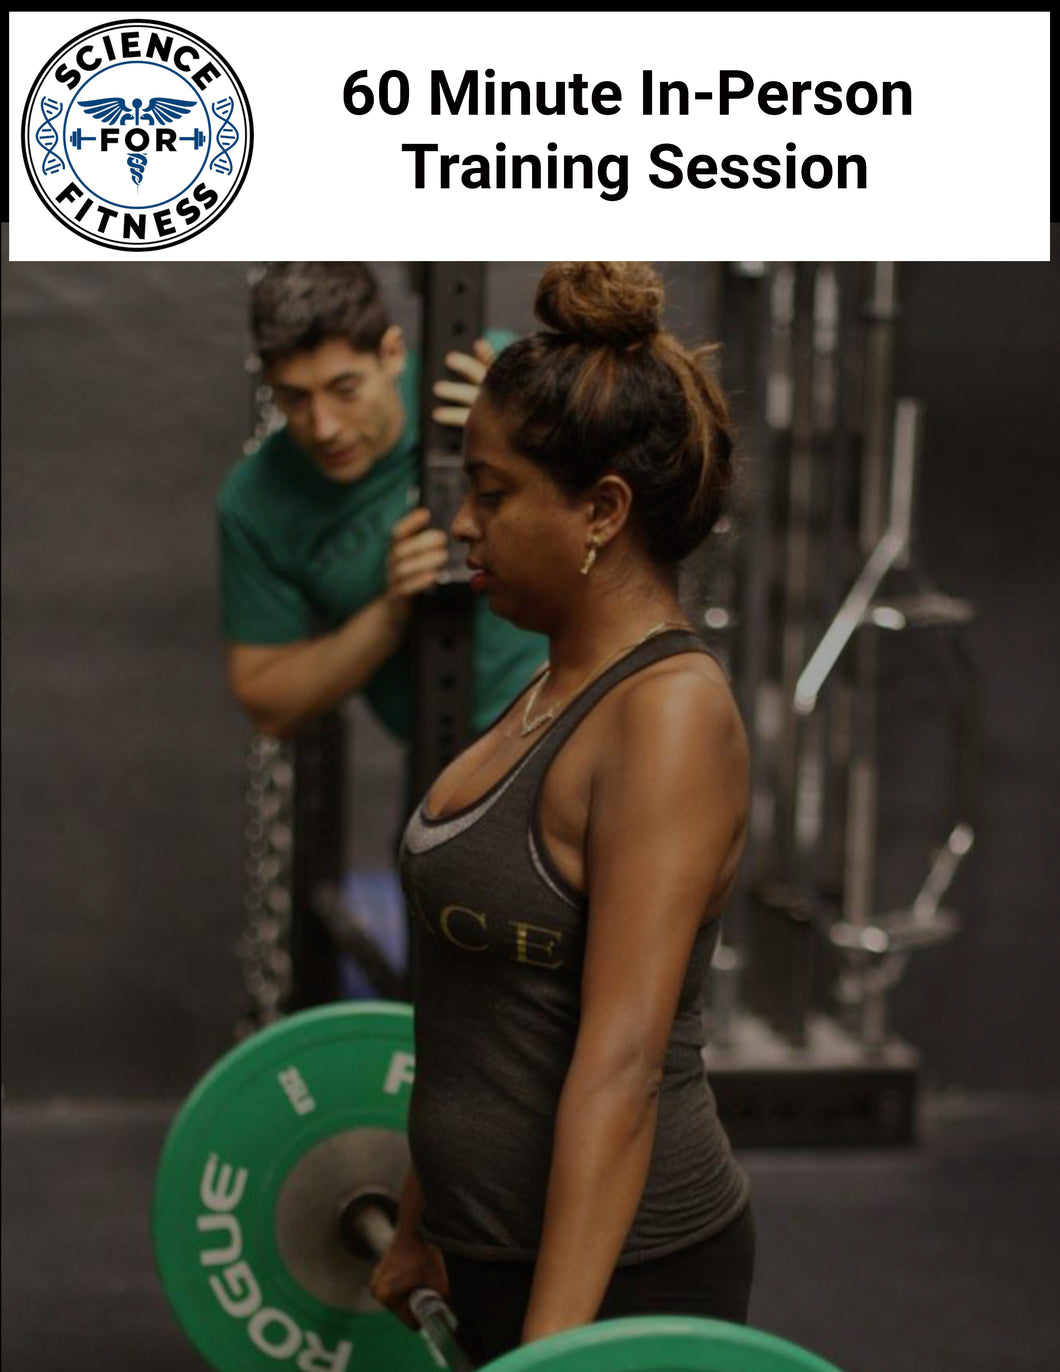 60 Min In-Person Training Session